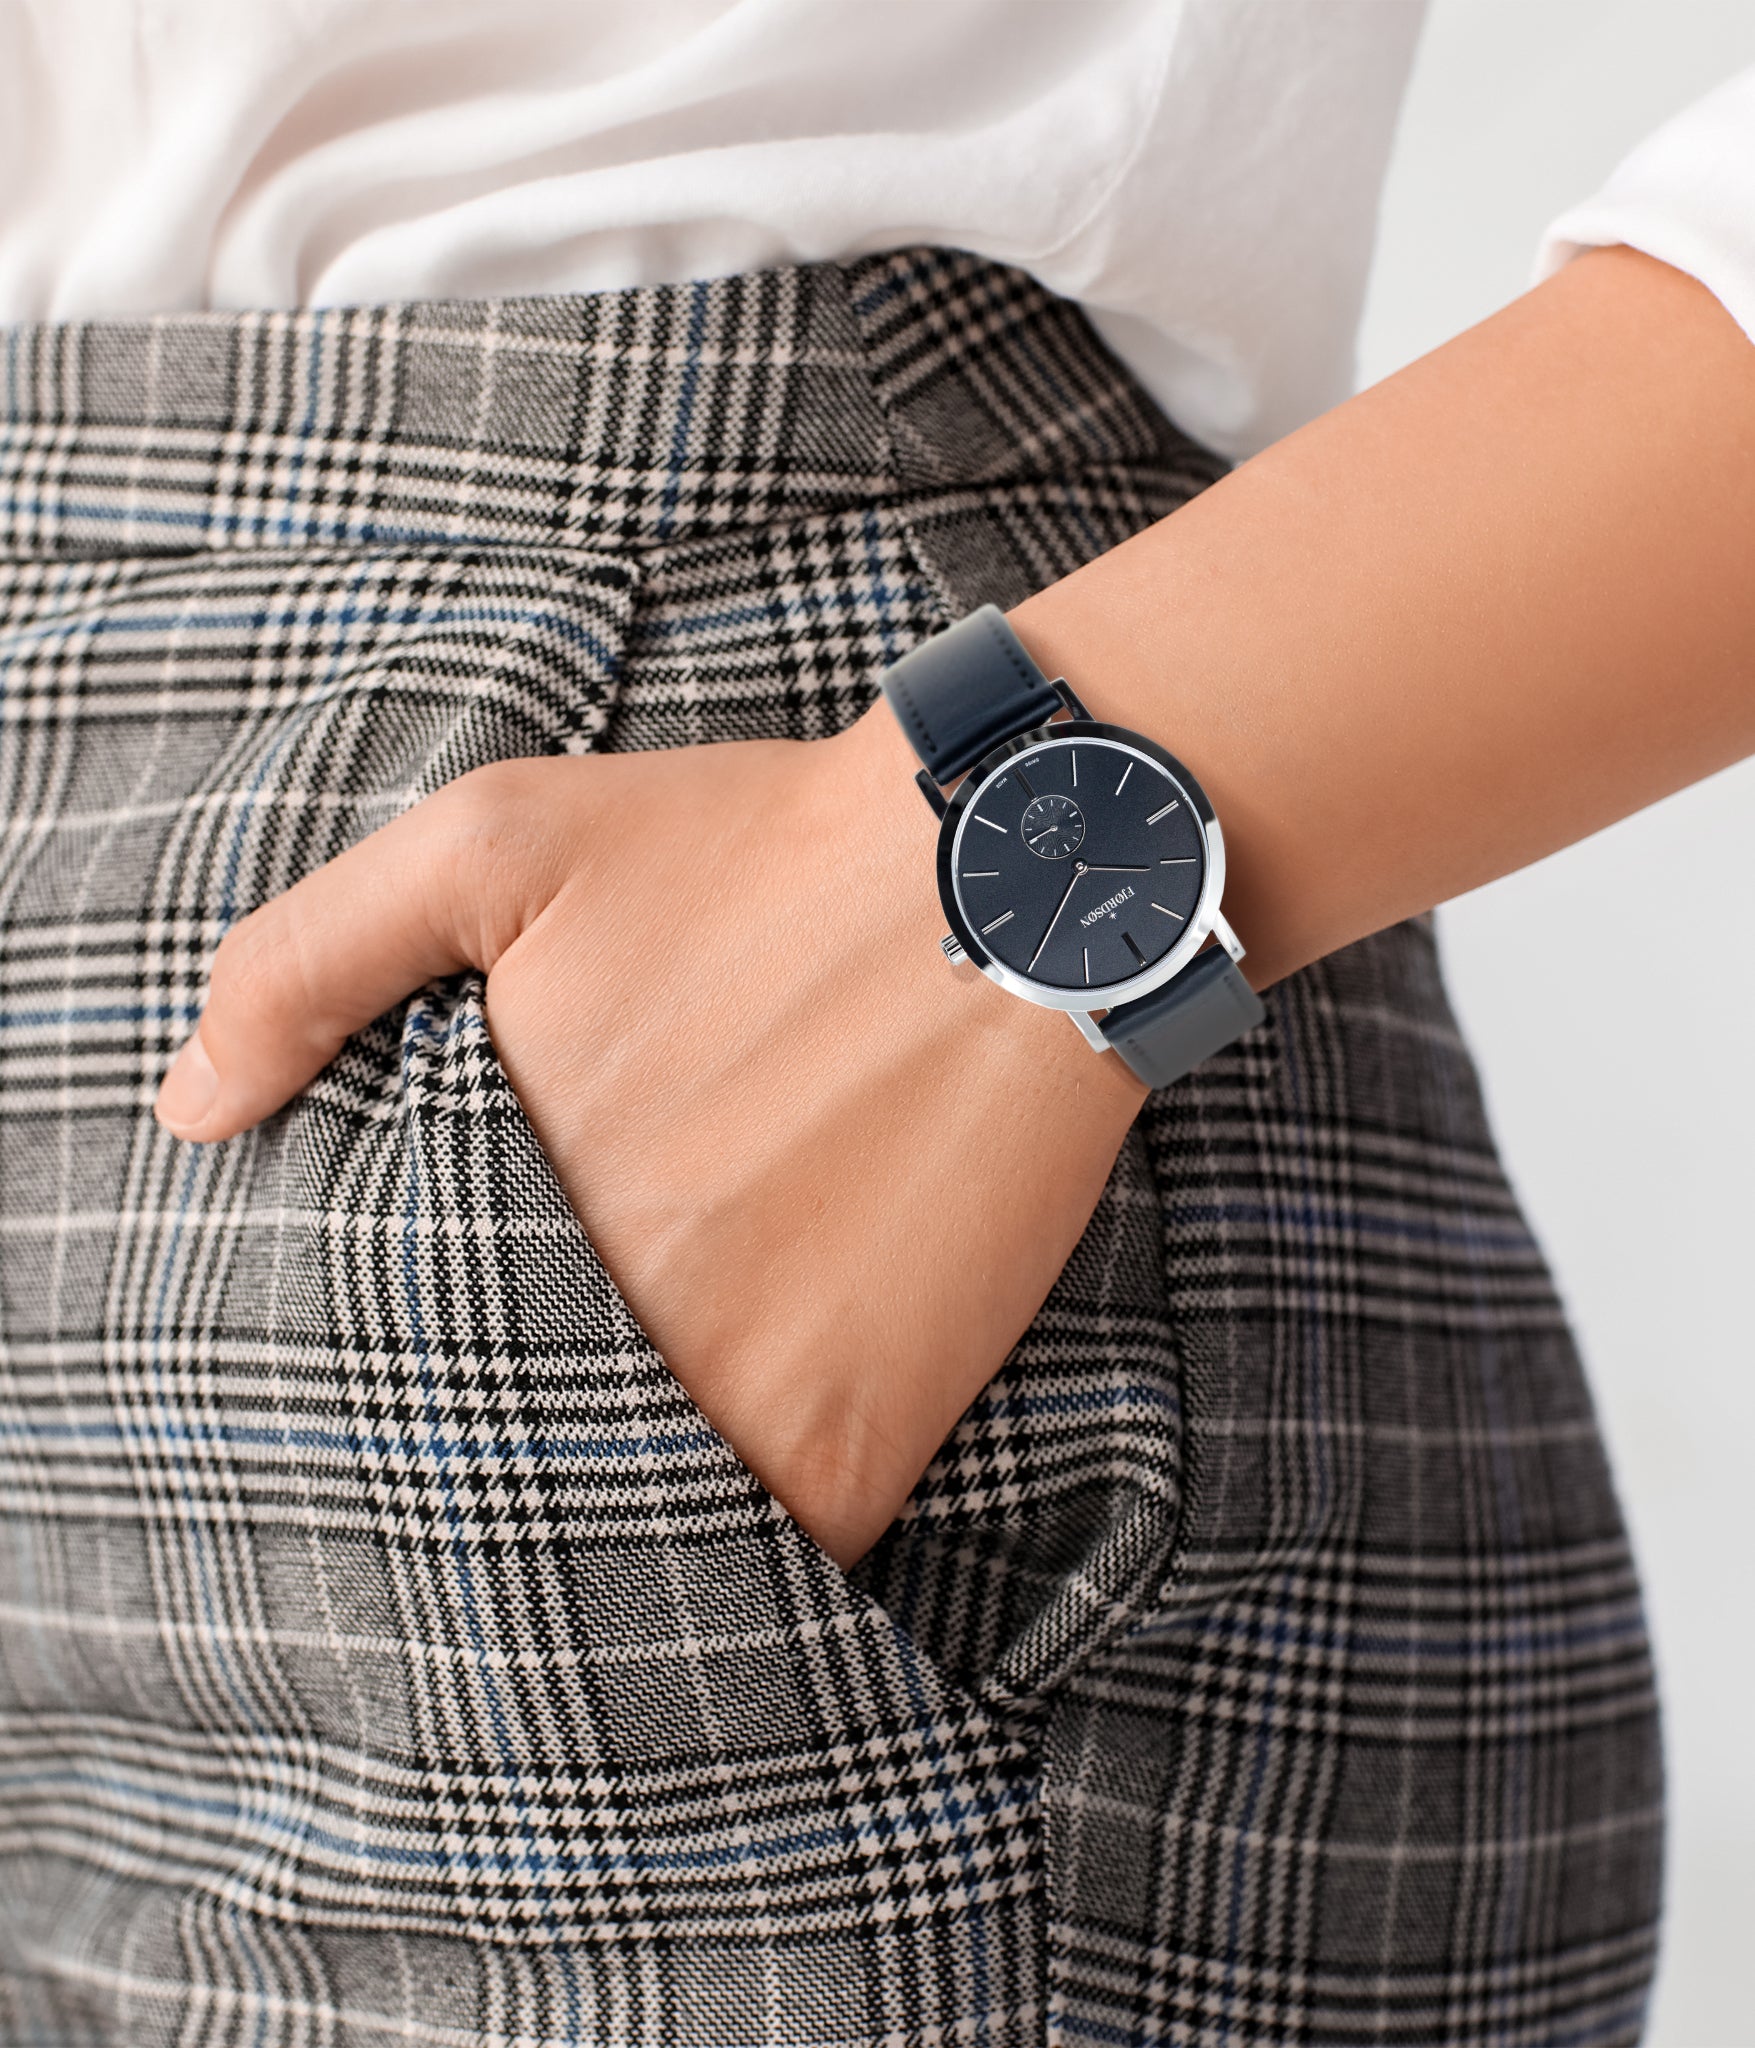 Woman wearing watch - Fjordson watch with black dial and vegan leather strap - UNISEX - vegan & approved by PETA - Swiss made